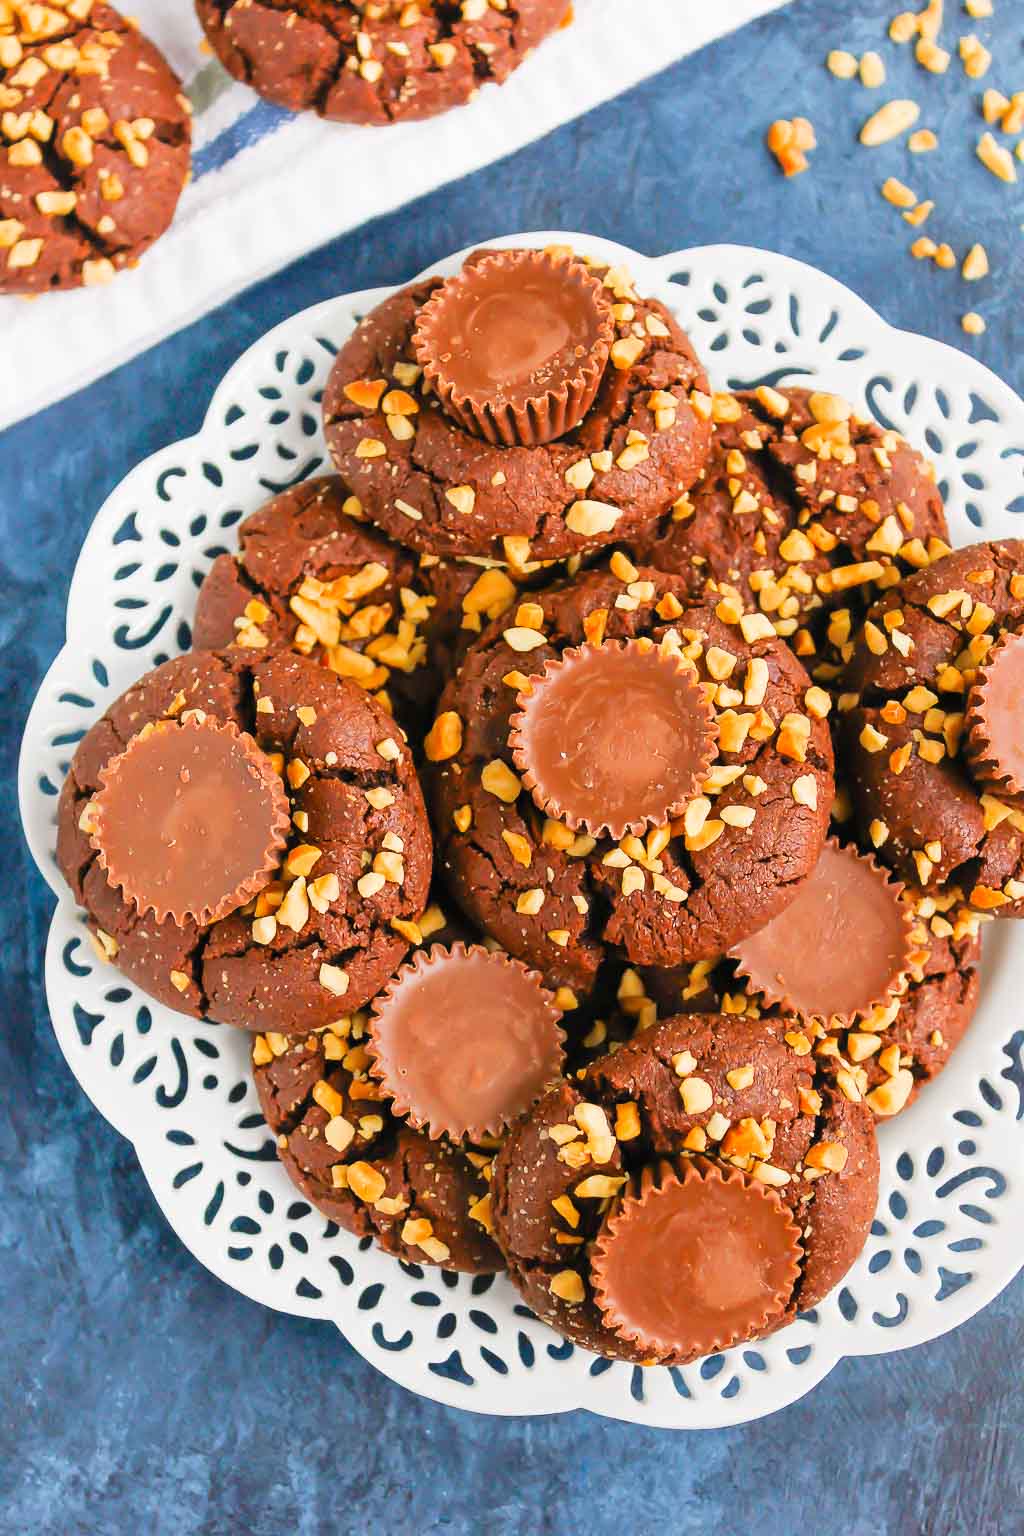 This fun spin on Chocolate Peanut Butter Blossoms adds even more chocolate and peanut butter flavor in every bite. This easy cookie recipe is soft, chewy, and all around delicious! #cookies #chocolatecookies #peanutbuttercookies #peanutbutterblossoms #blossomcookies #cookierecipe #holidaycookies #christmascookies #dessert